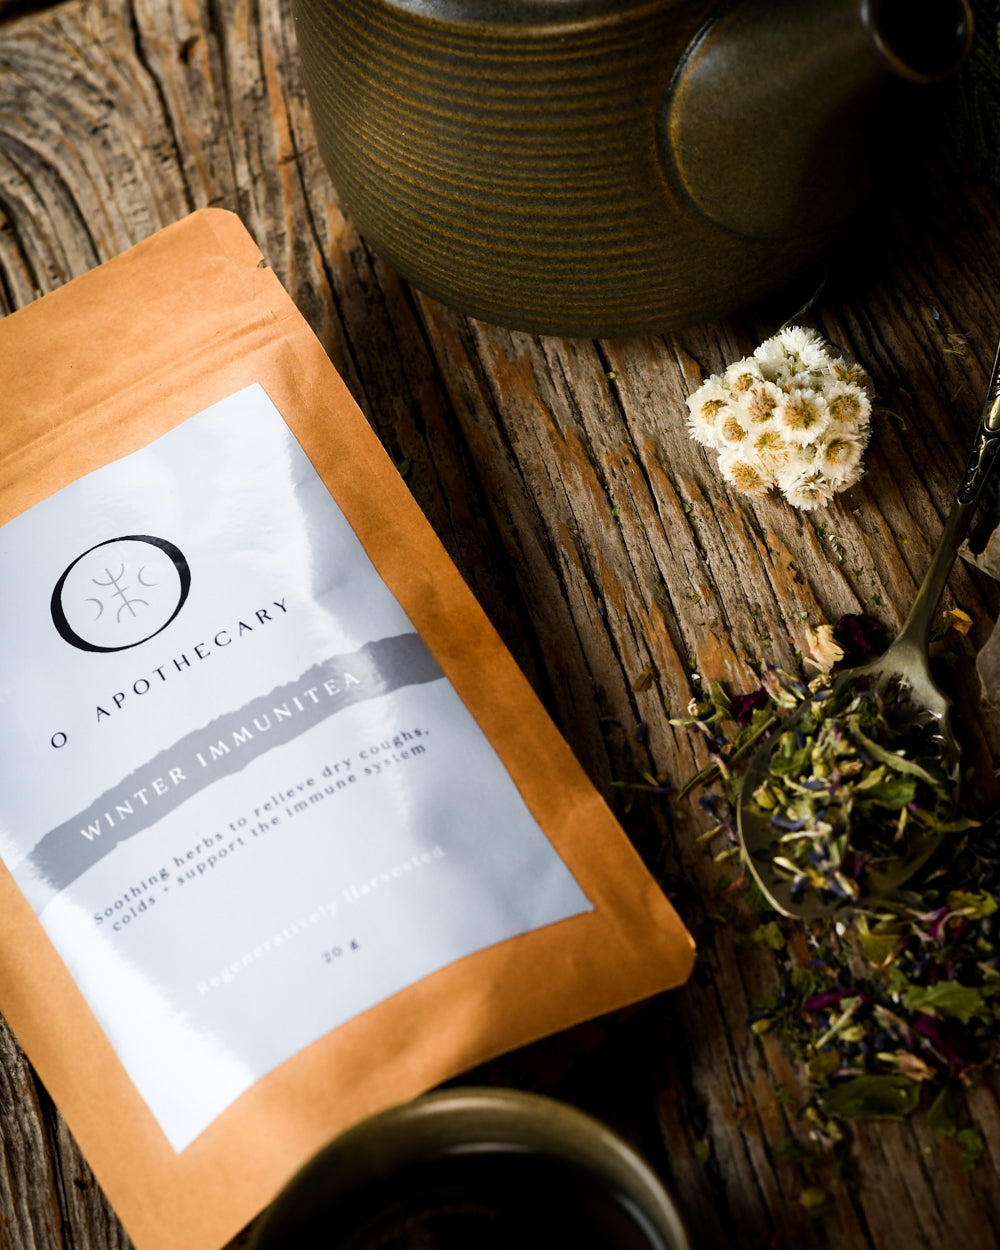 Winter Immune Tea loose leaf by O Apothecary